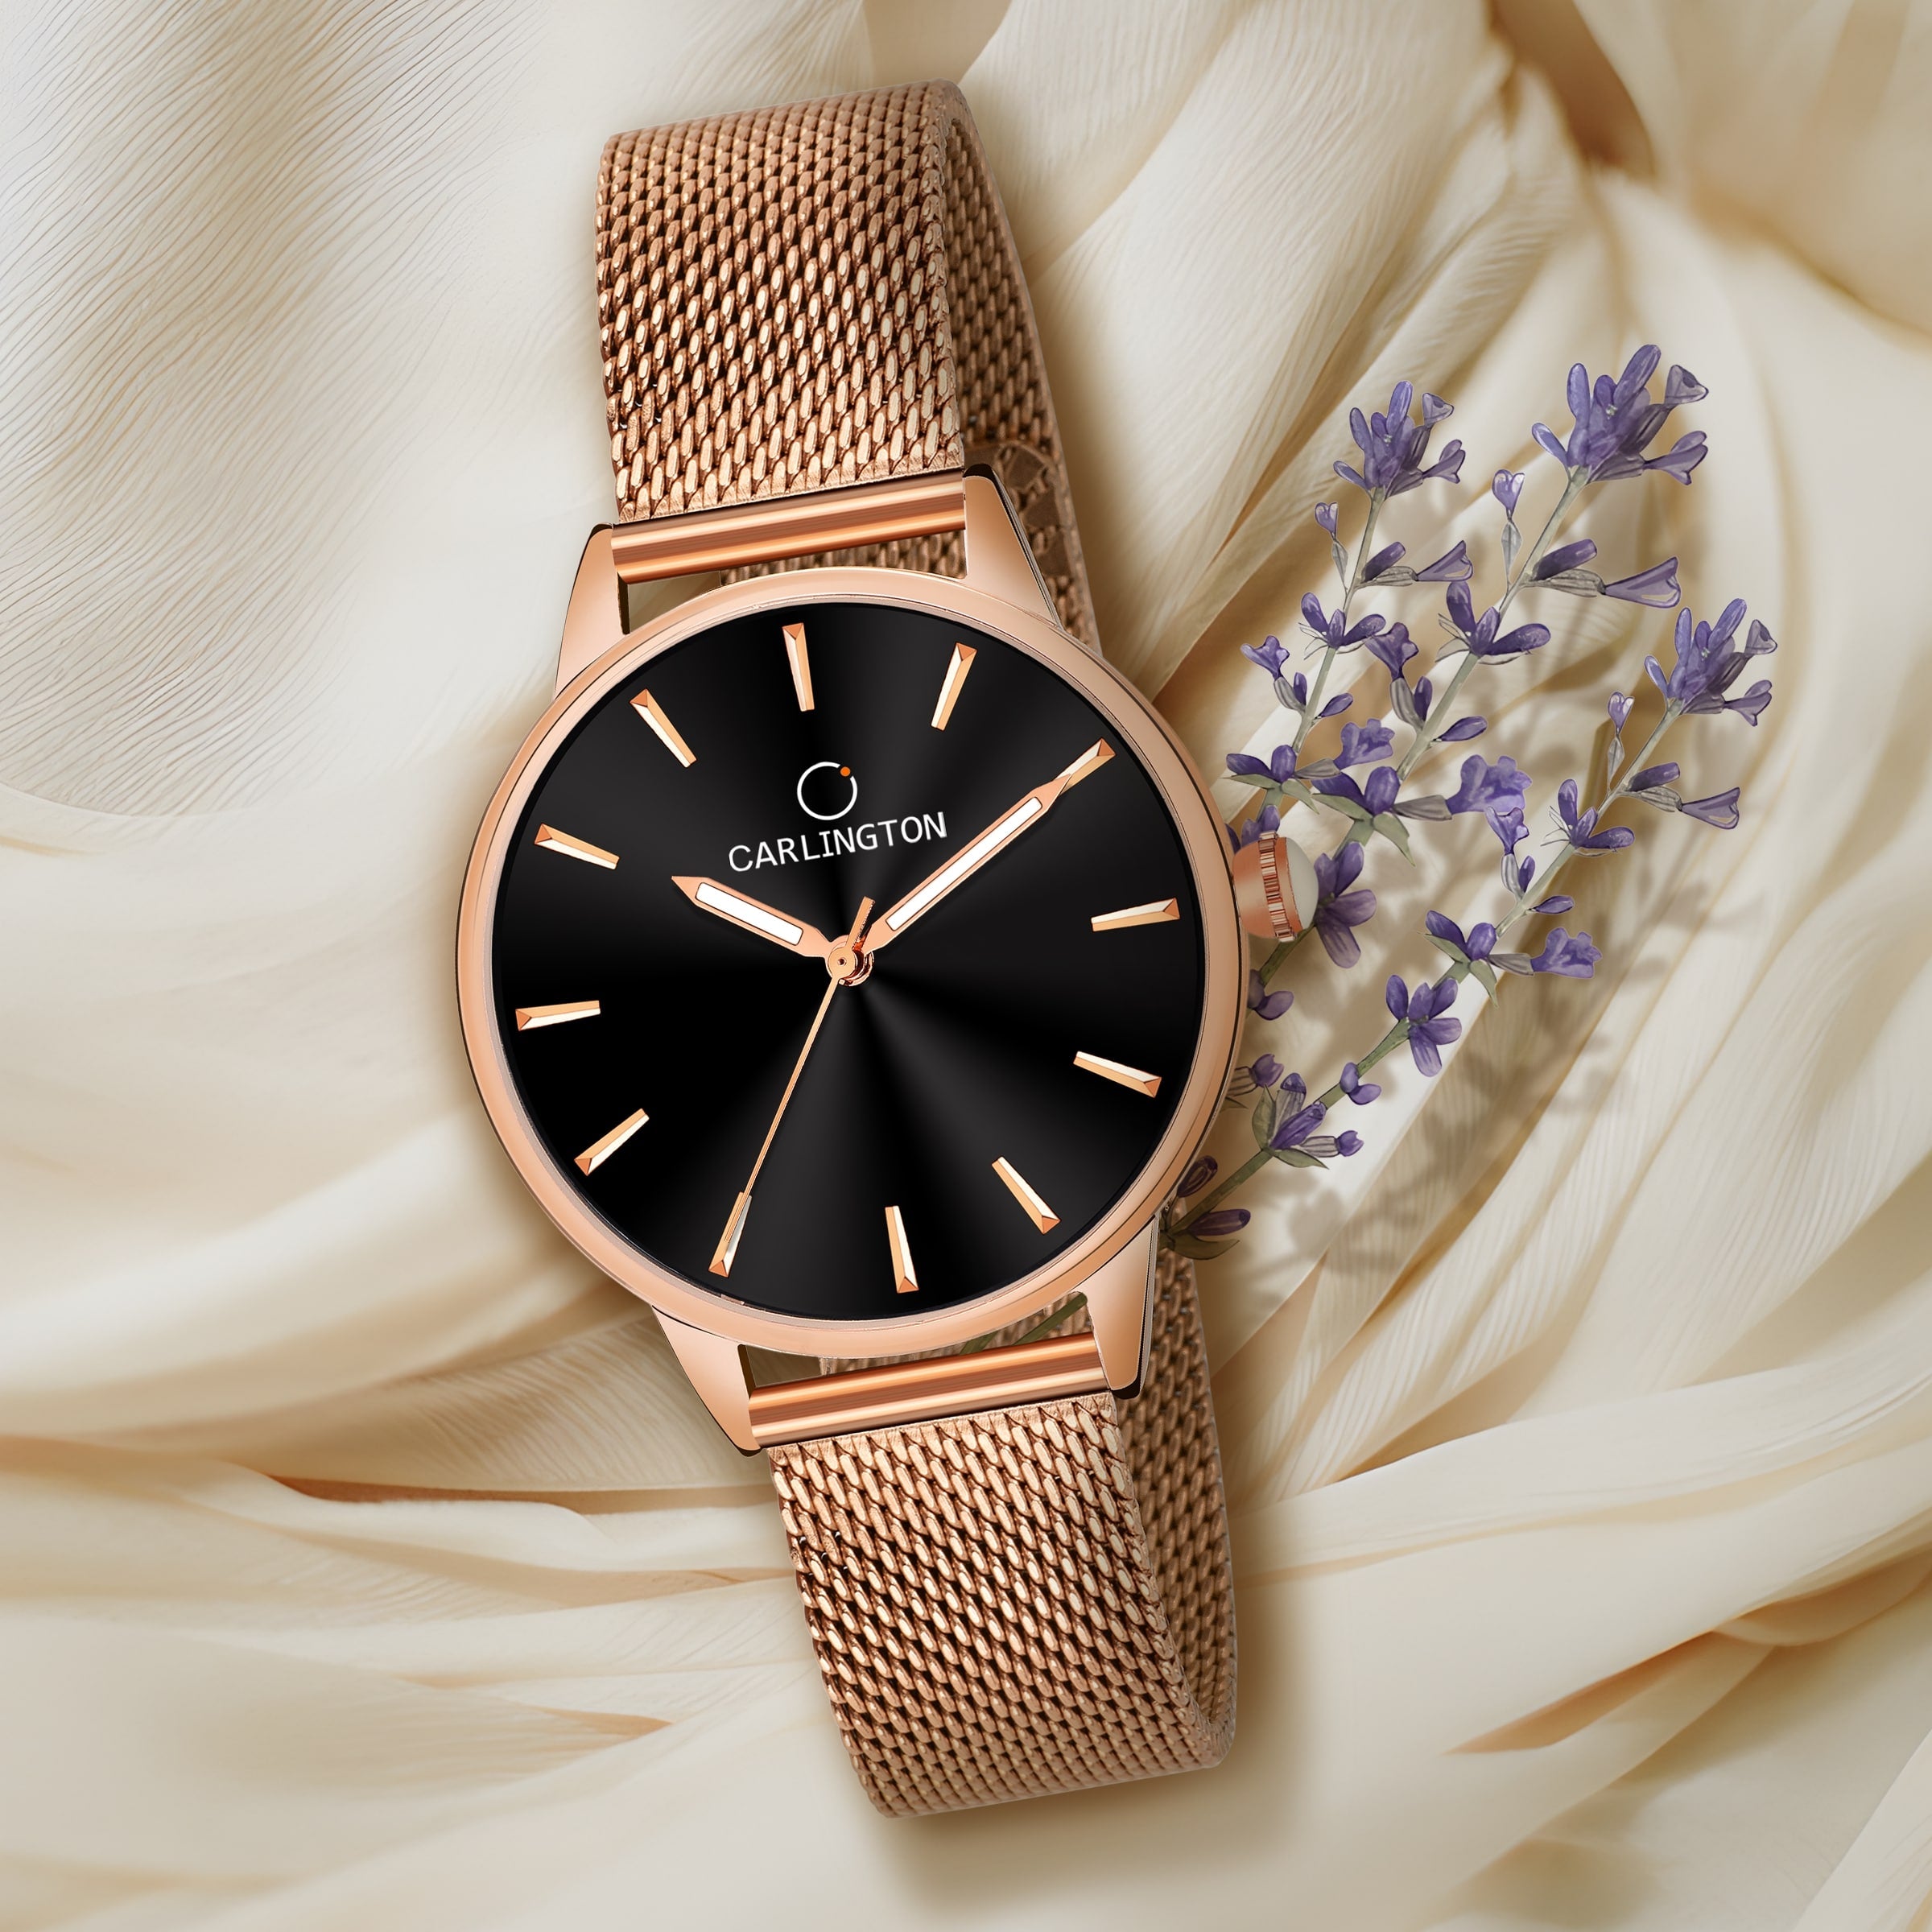 Best smartwatches for women in 2024